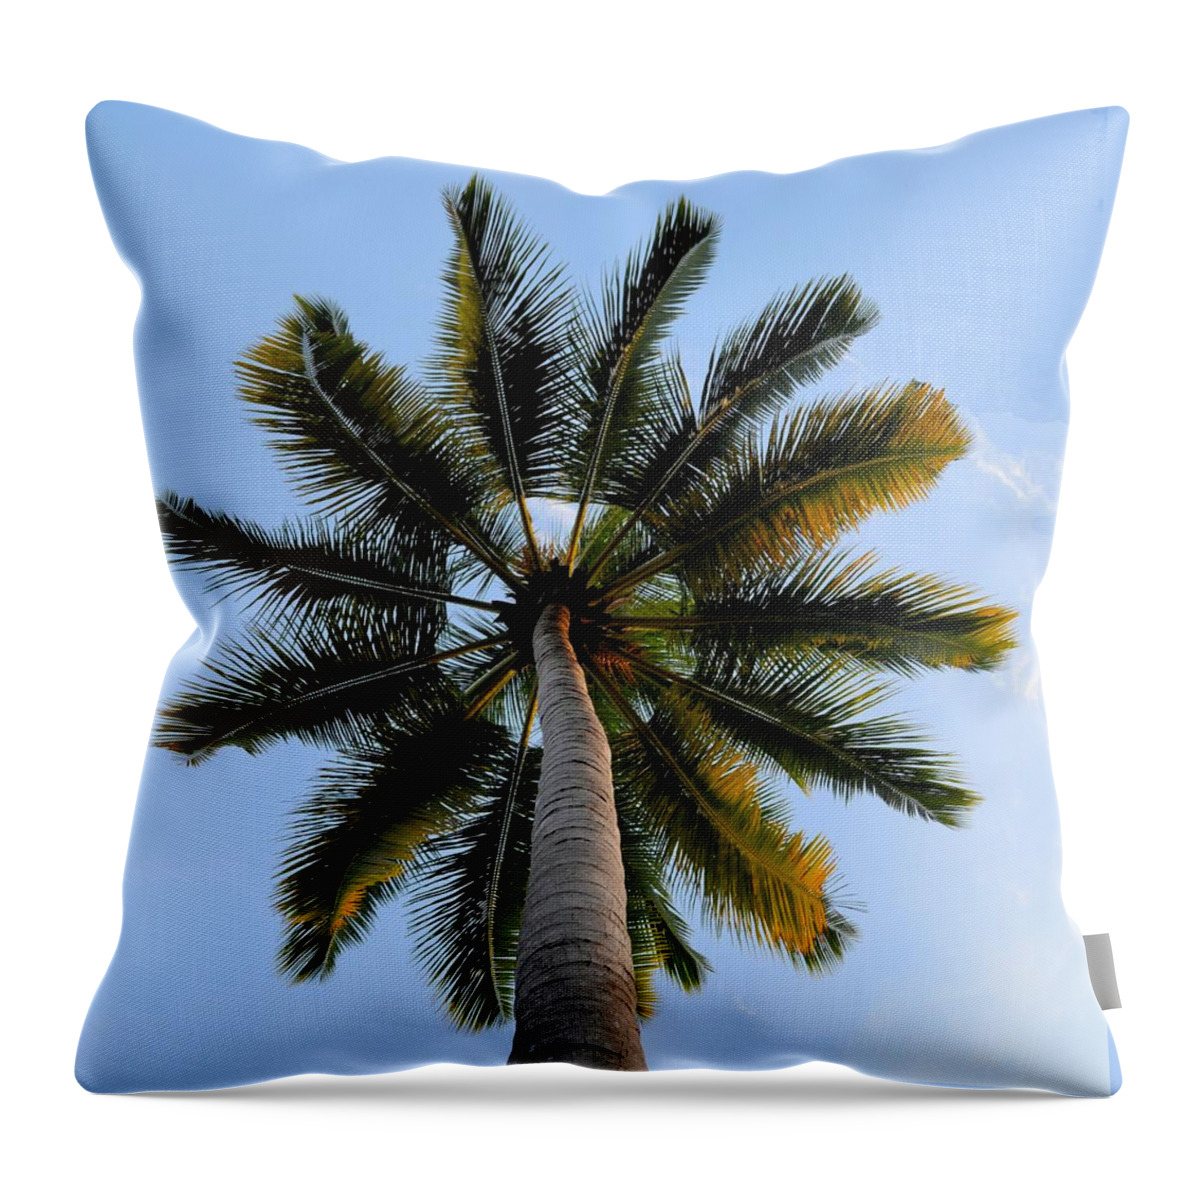 Tranquility Throw Pillow featuring the photograph Coconut Tree by My Image